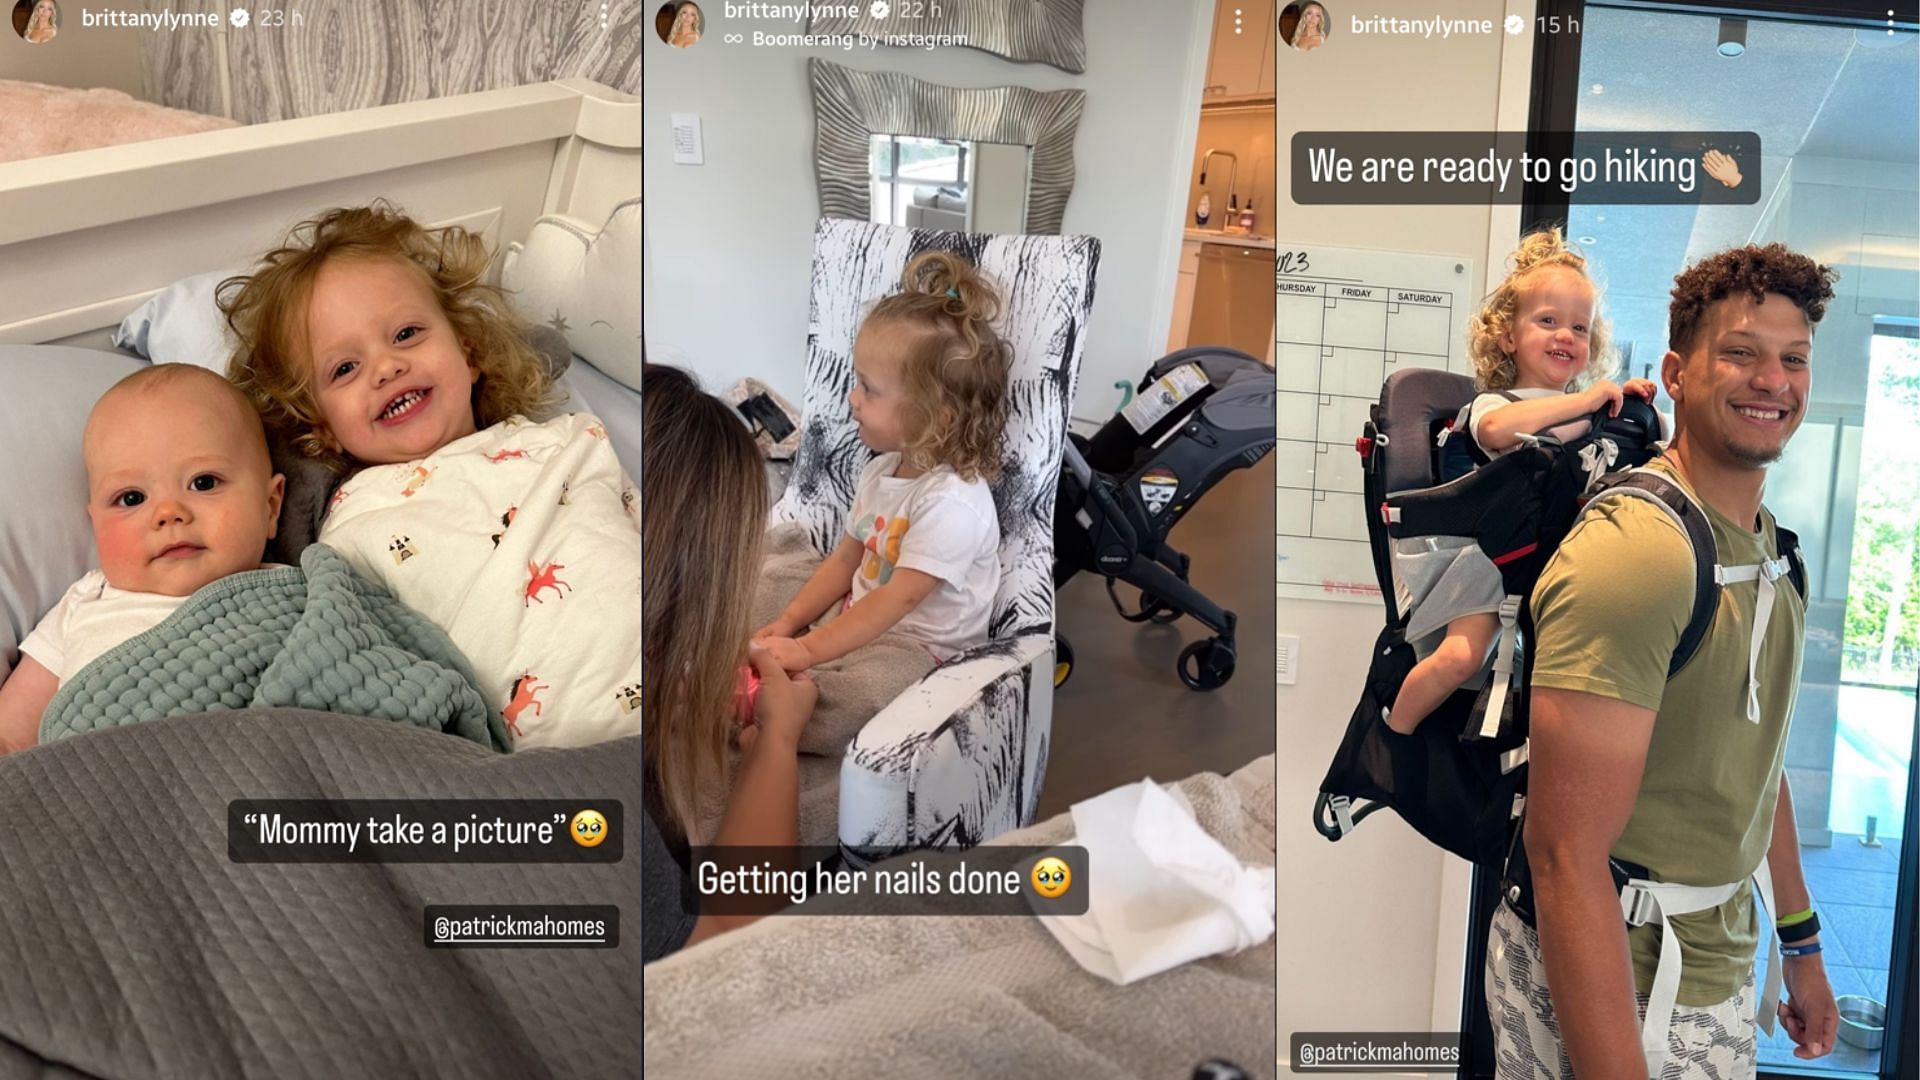 Brittany Mahomes shared adorable snaps of her family as they got ready for a fun hiking trip (Image Credit: Brittany Mahomes&#039; Instagram Story).